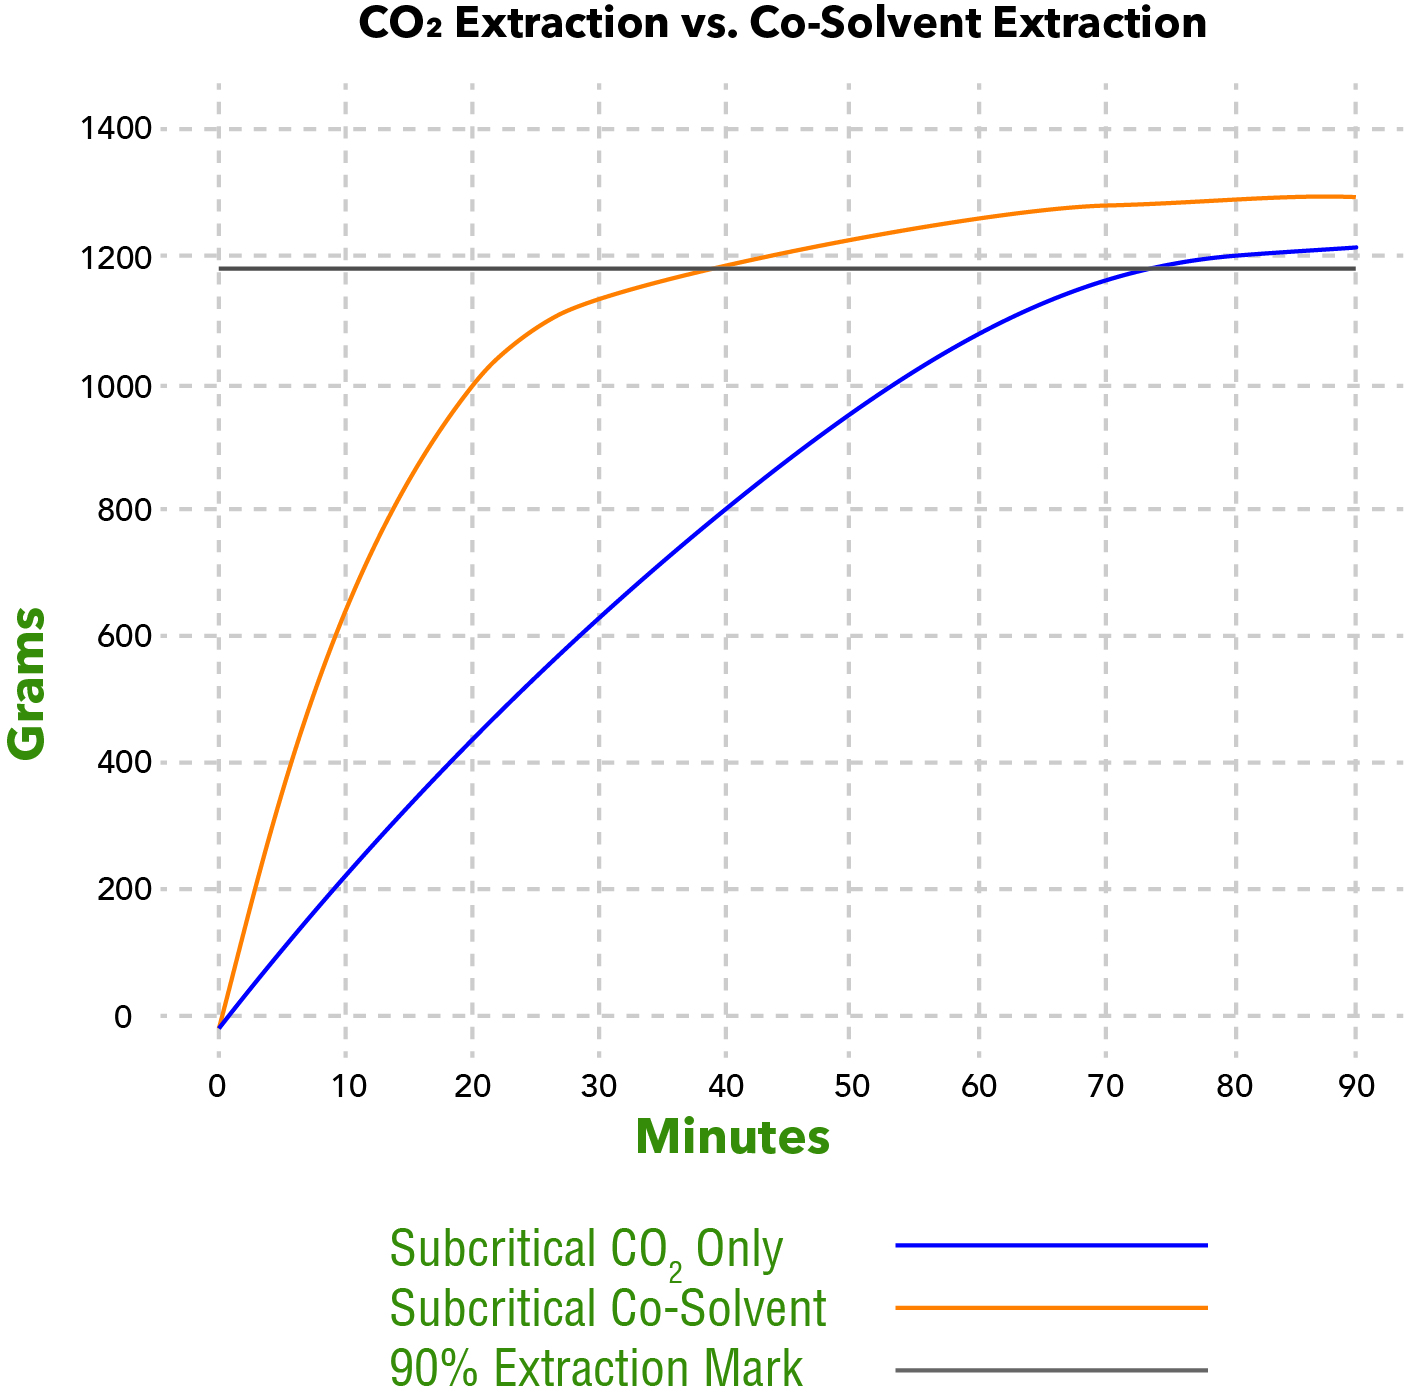 https://campaign-image.com/zohocampaigns/122231000015867518_zc_v88_co2_only_vs_co_solvent.jpg